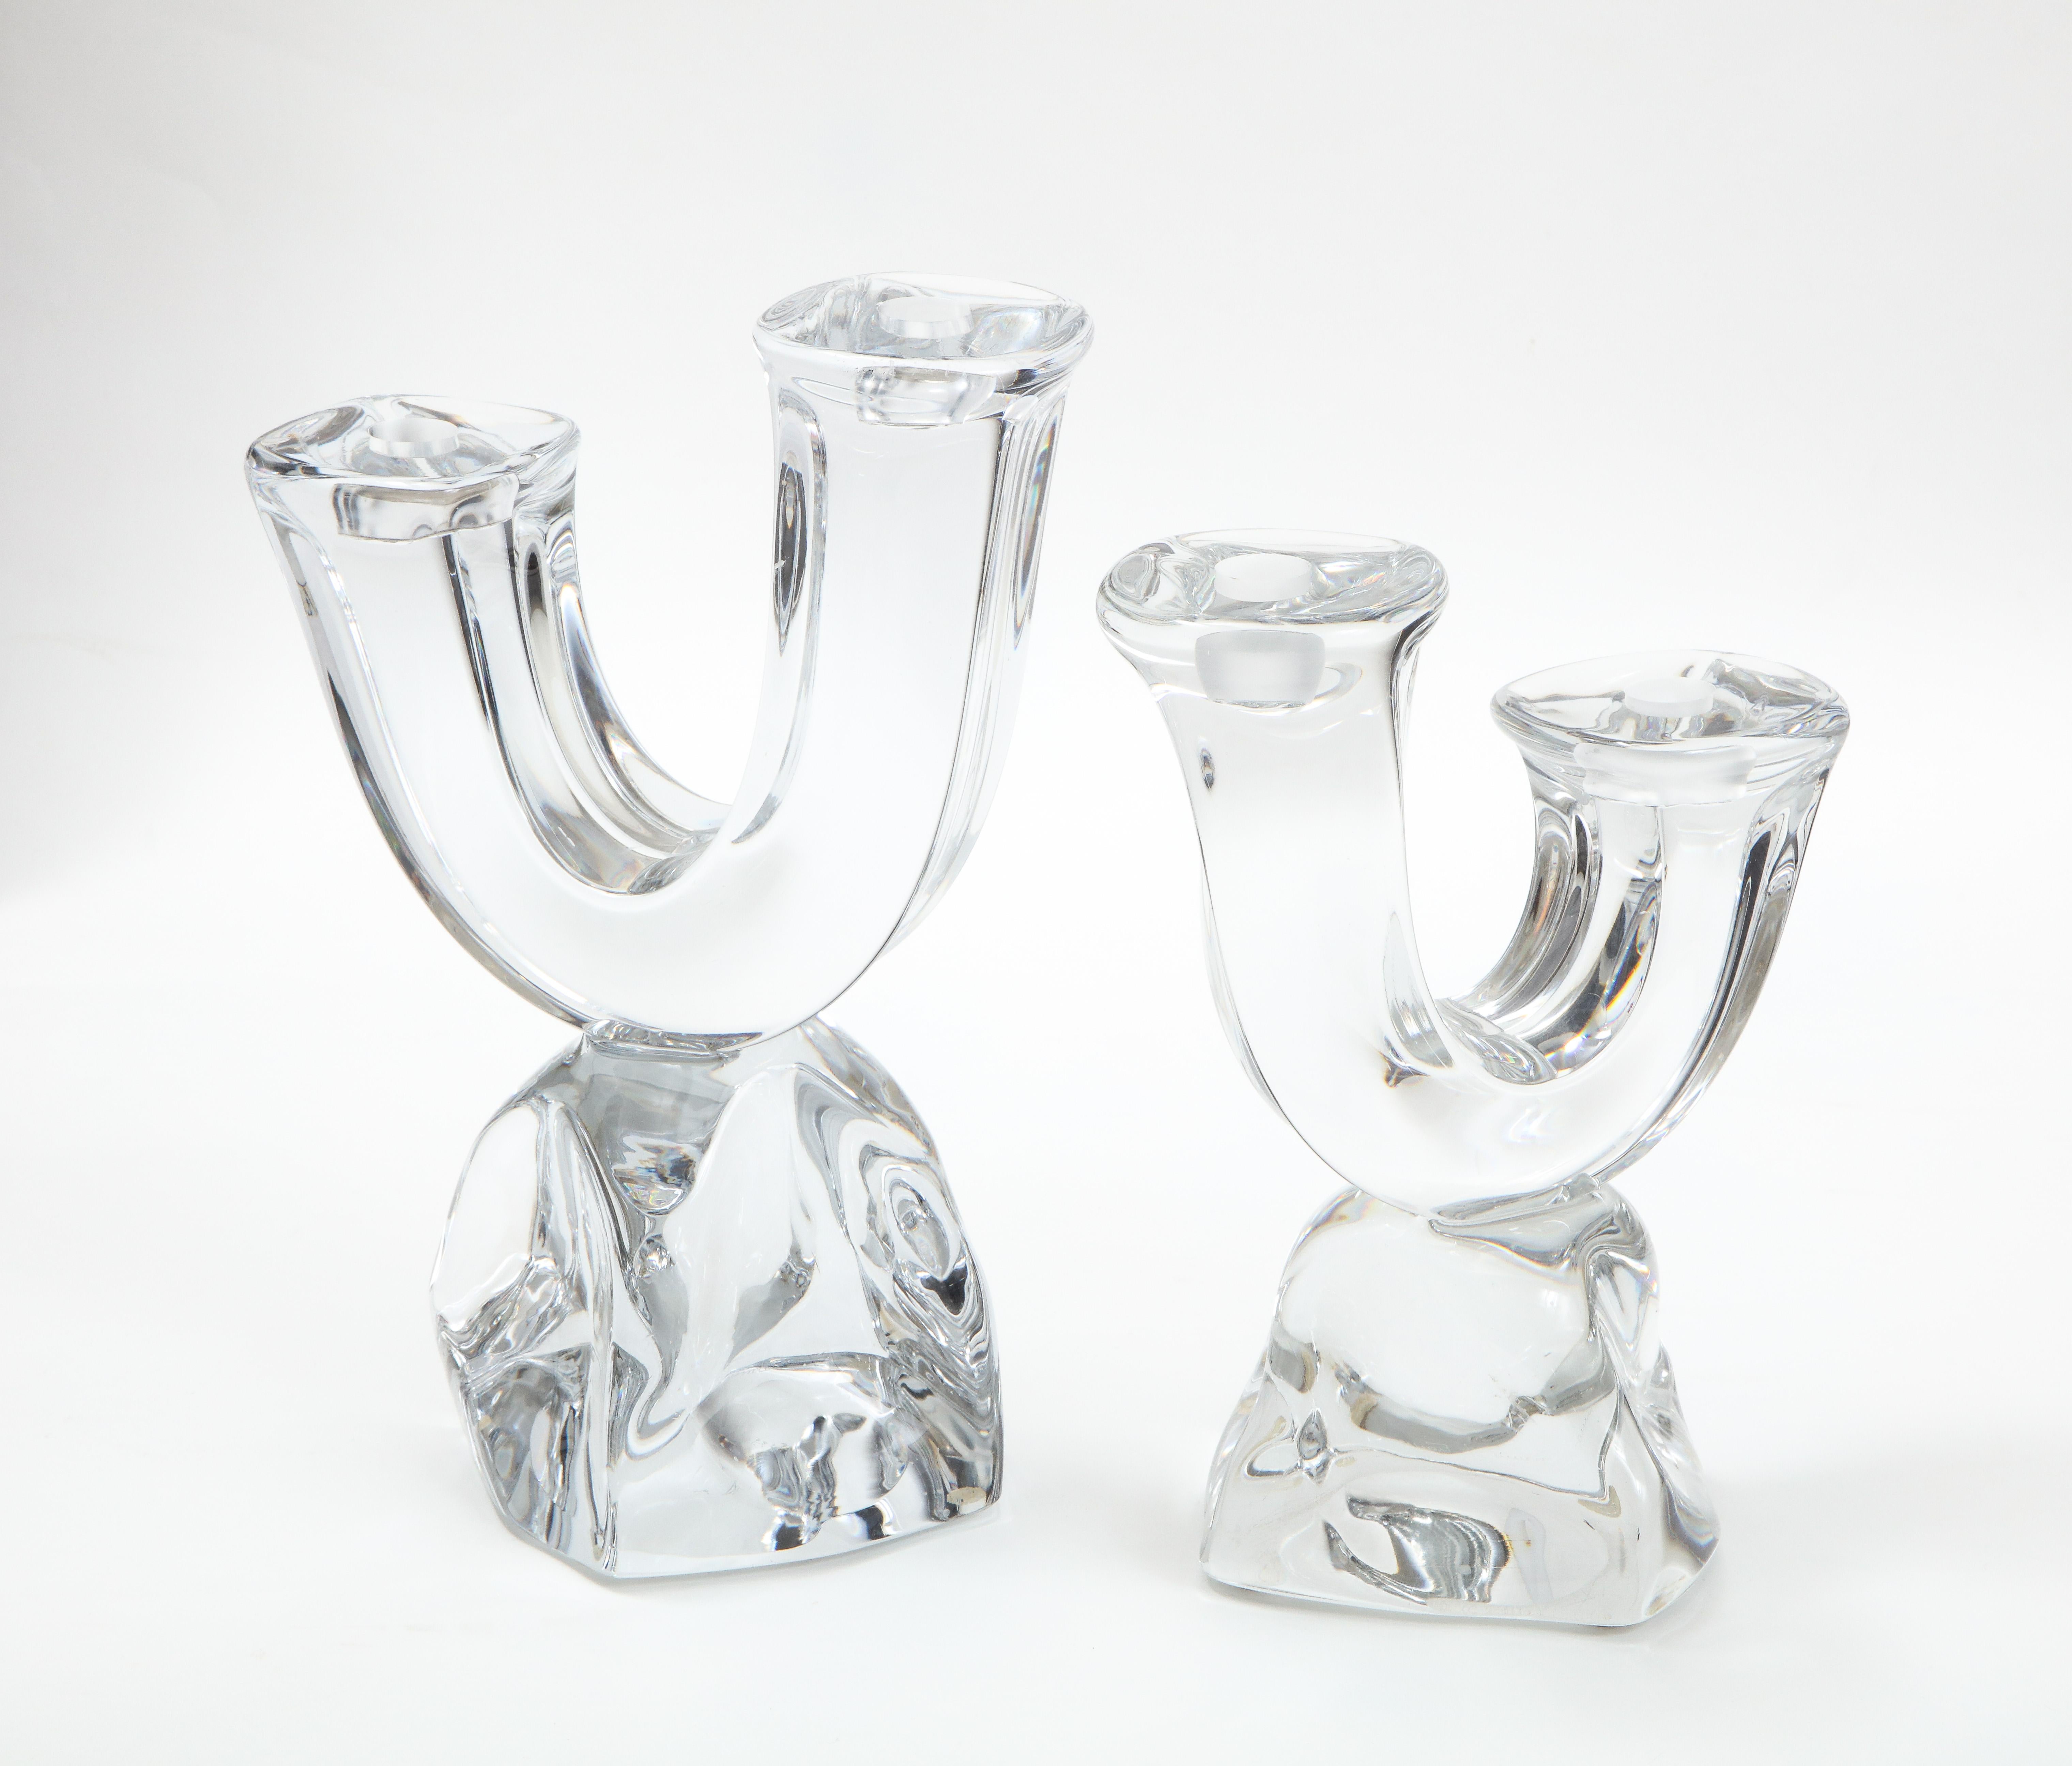 Stunning pair of 1960s modern handmade two-arm crystal candle holders by Daum France. Both are signed. 

Please notice the size is slightly different.

Smaller candleholder measurements: width 8'' depth 4'' height 9.5''.